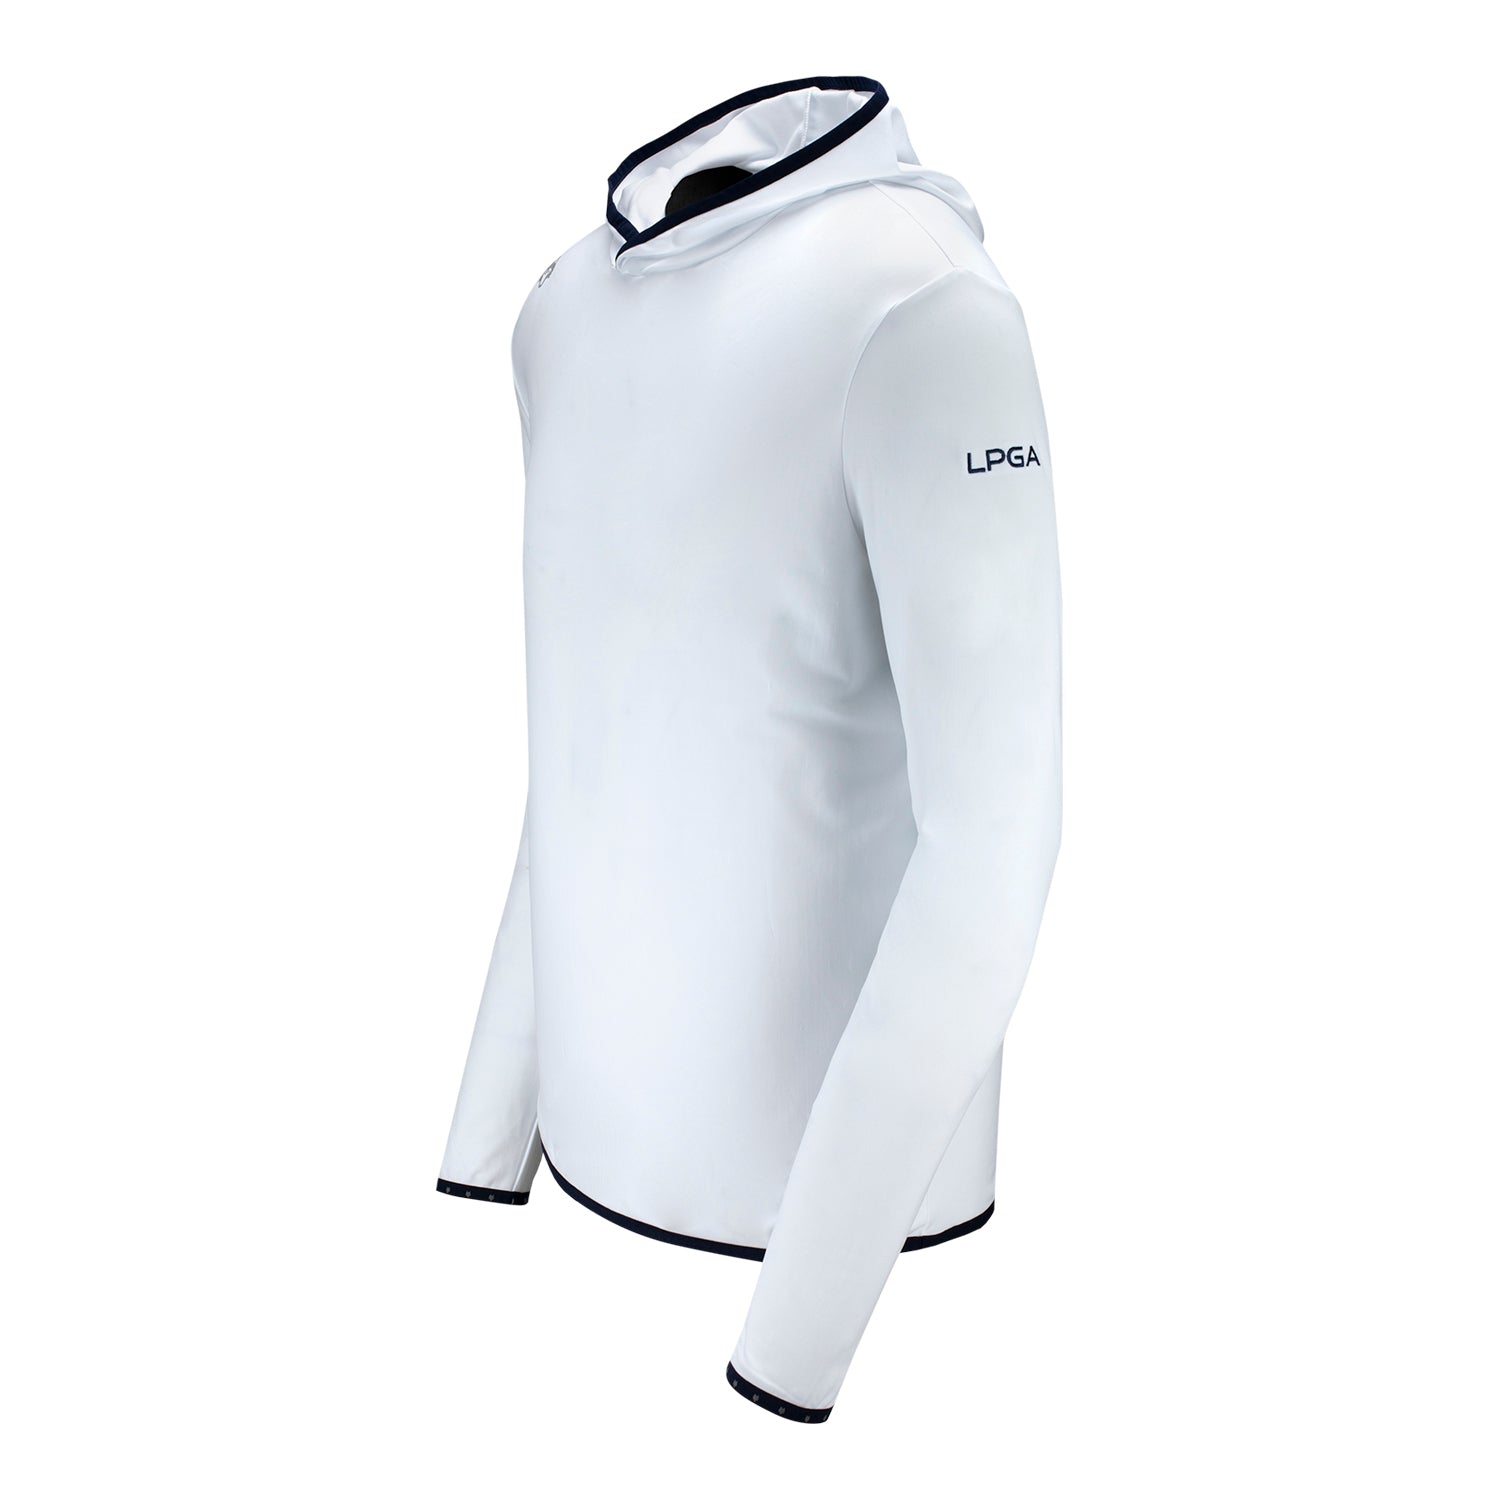 Greyson Clothiers LPGA Men's Colorado Golf Hoodie in White - Angled Left Side View